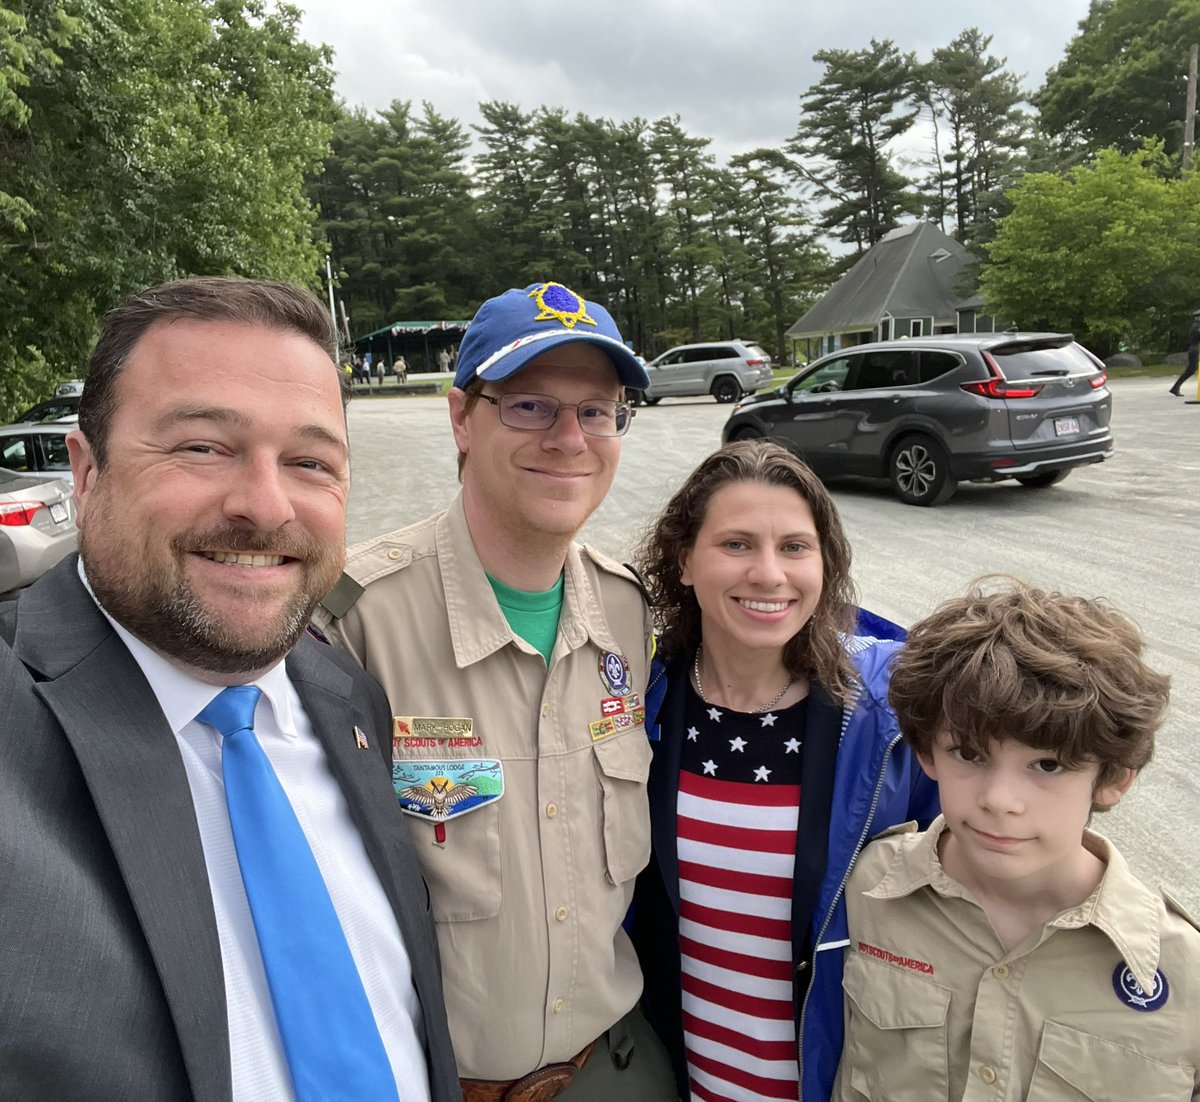 The weather didn’t allow for a full ceremony, but thanks to everyone who made the attempt to celebrate Flag Day at Memorial Park Beach. At least I got to say a quick hello to @HannaSwit, Town Clerk Mark F. Hogan, & Scout (& newly minted Middle Schooler) Seamus Hogan! 🇺🇸